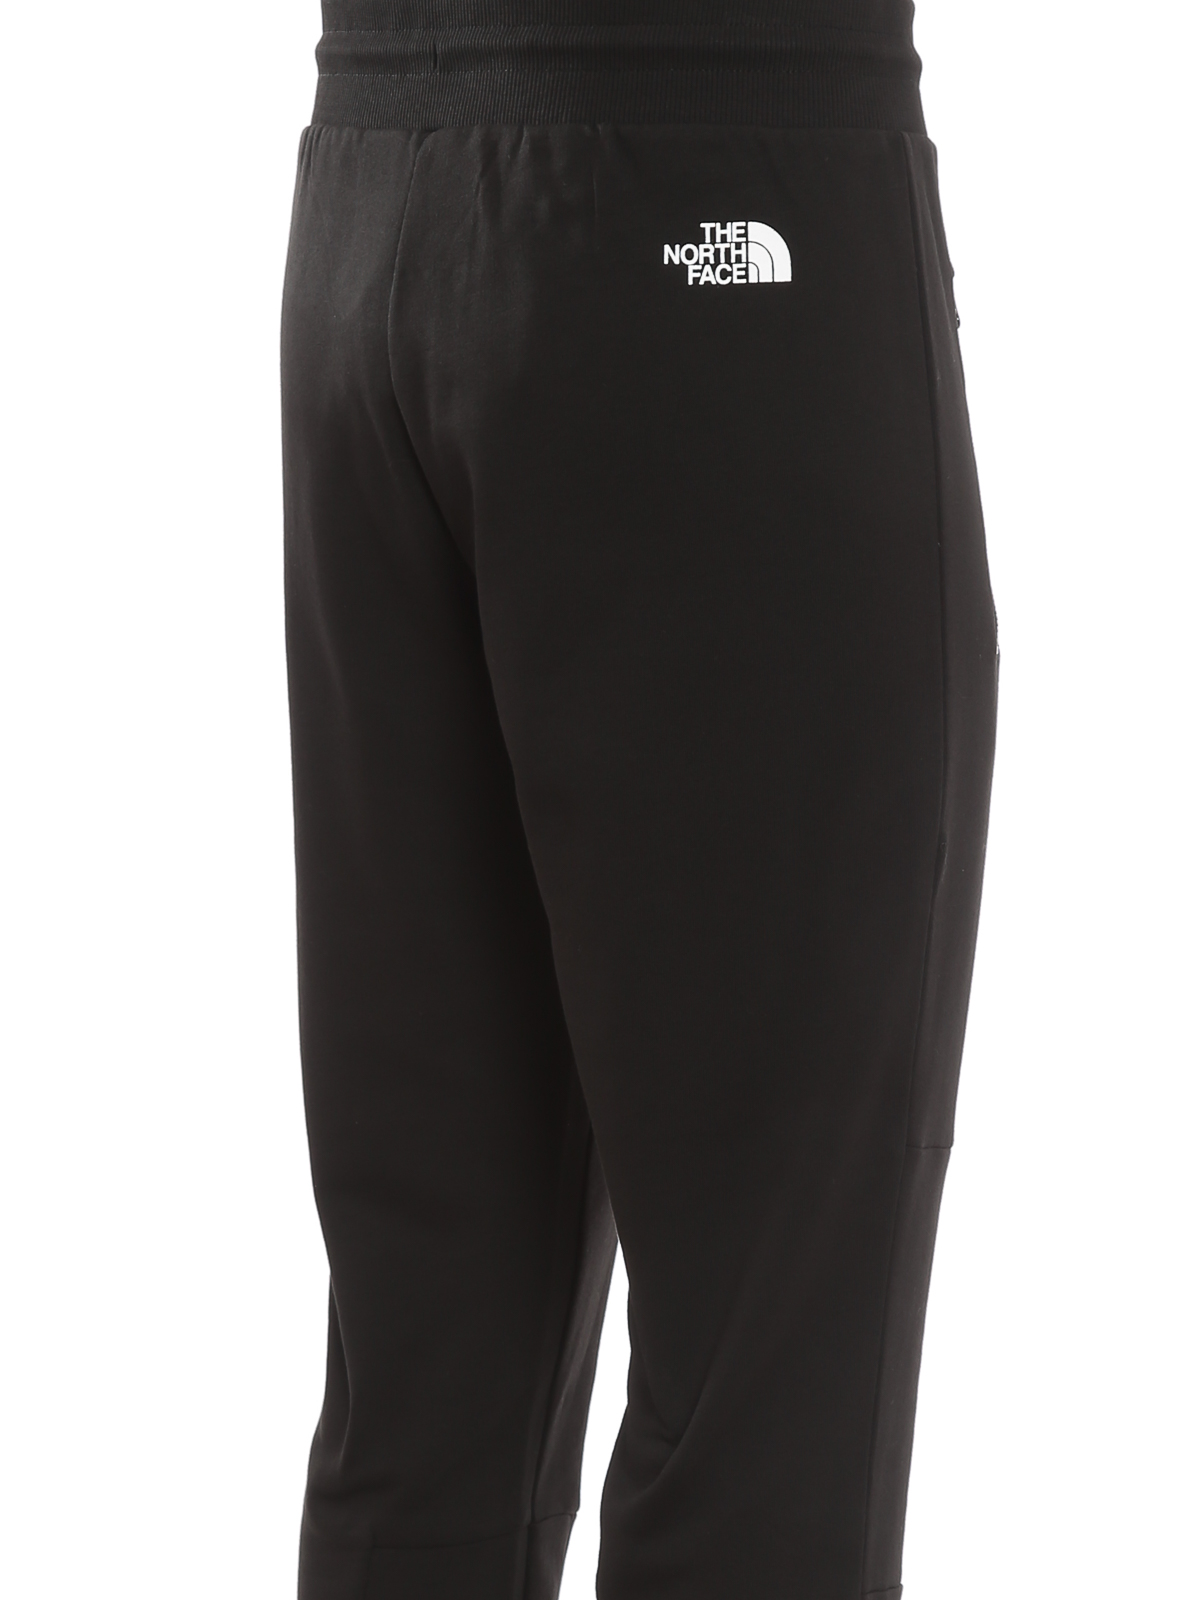 Tracksuit bottoms The North Face - Hmlyn track pants - NF0A4SWOJK3